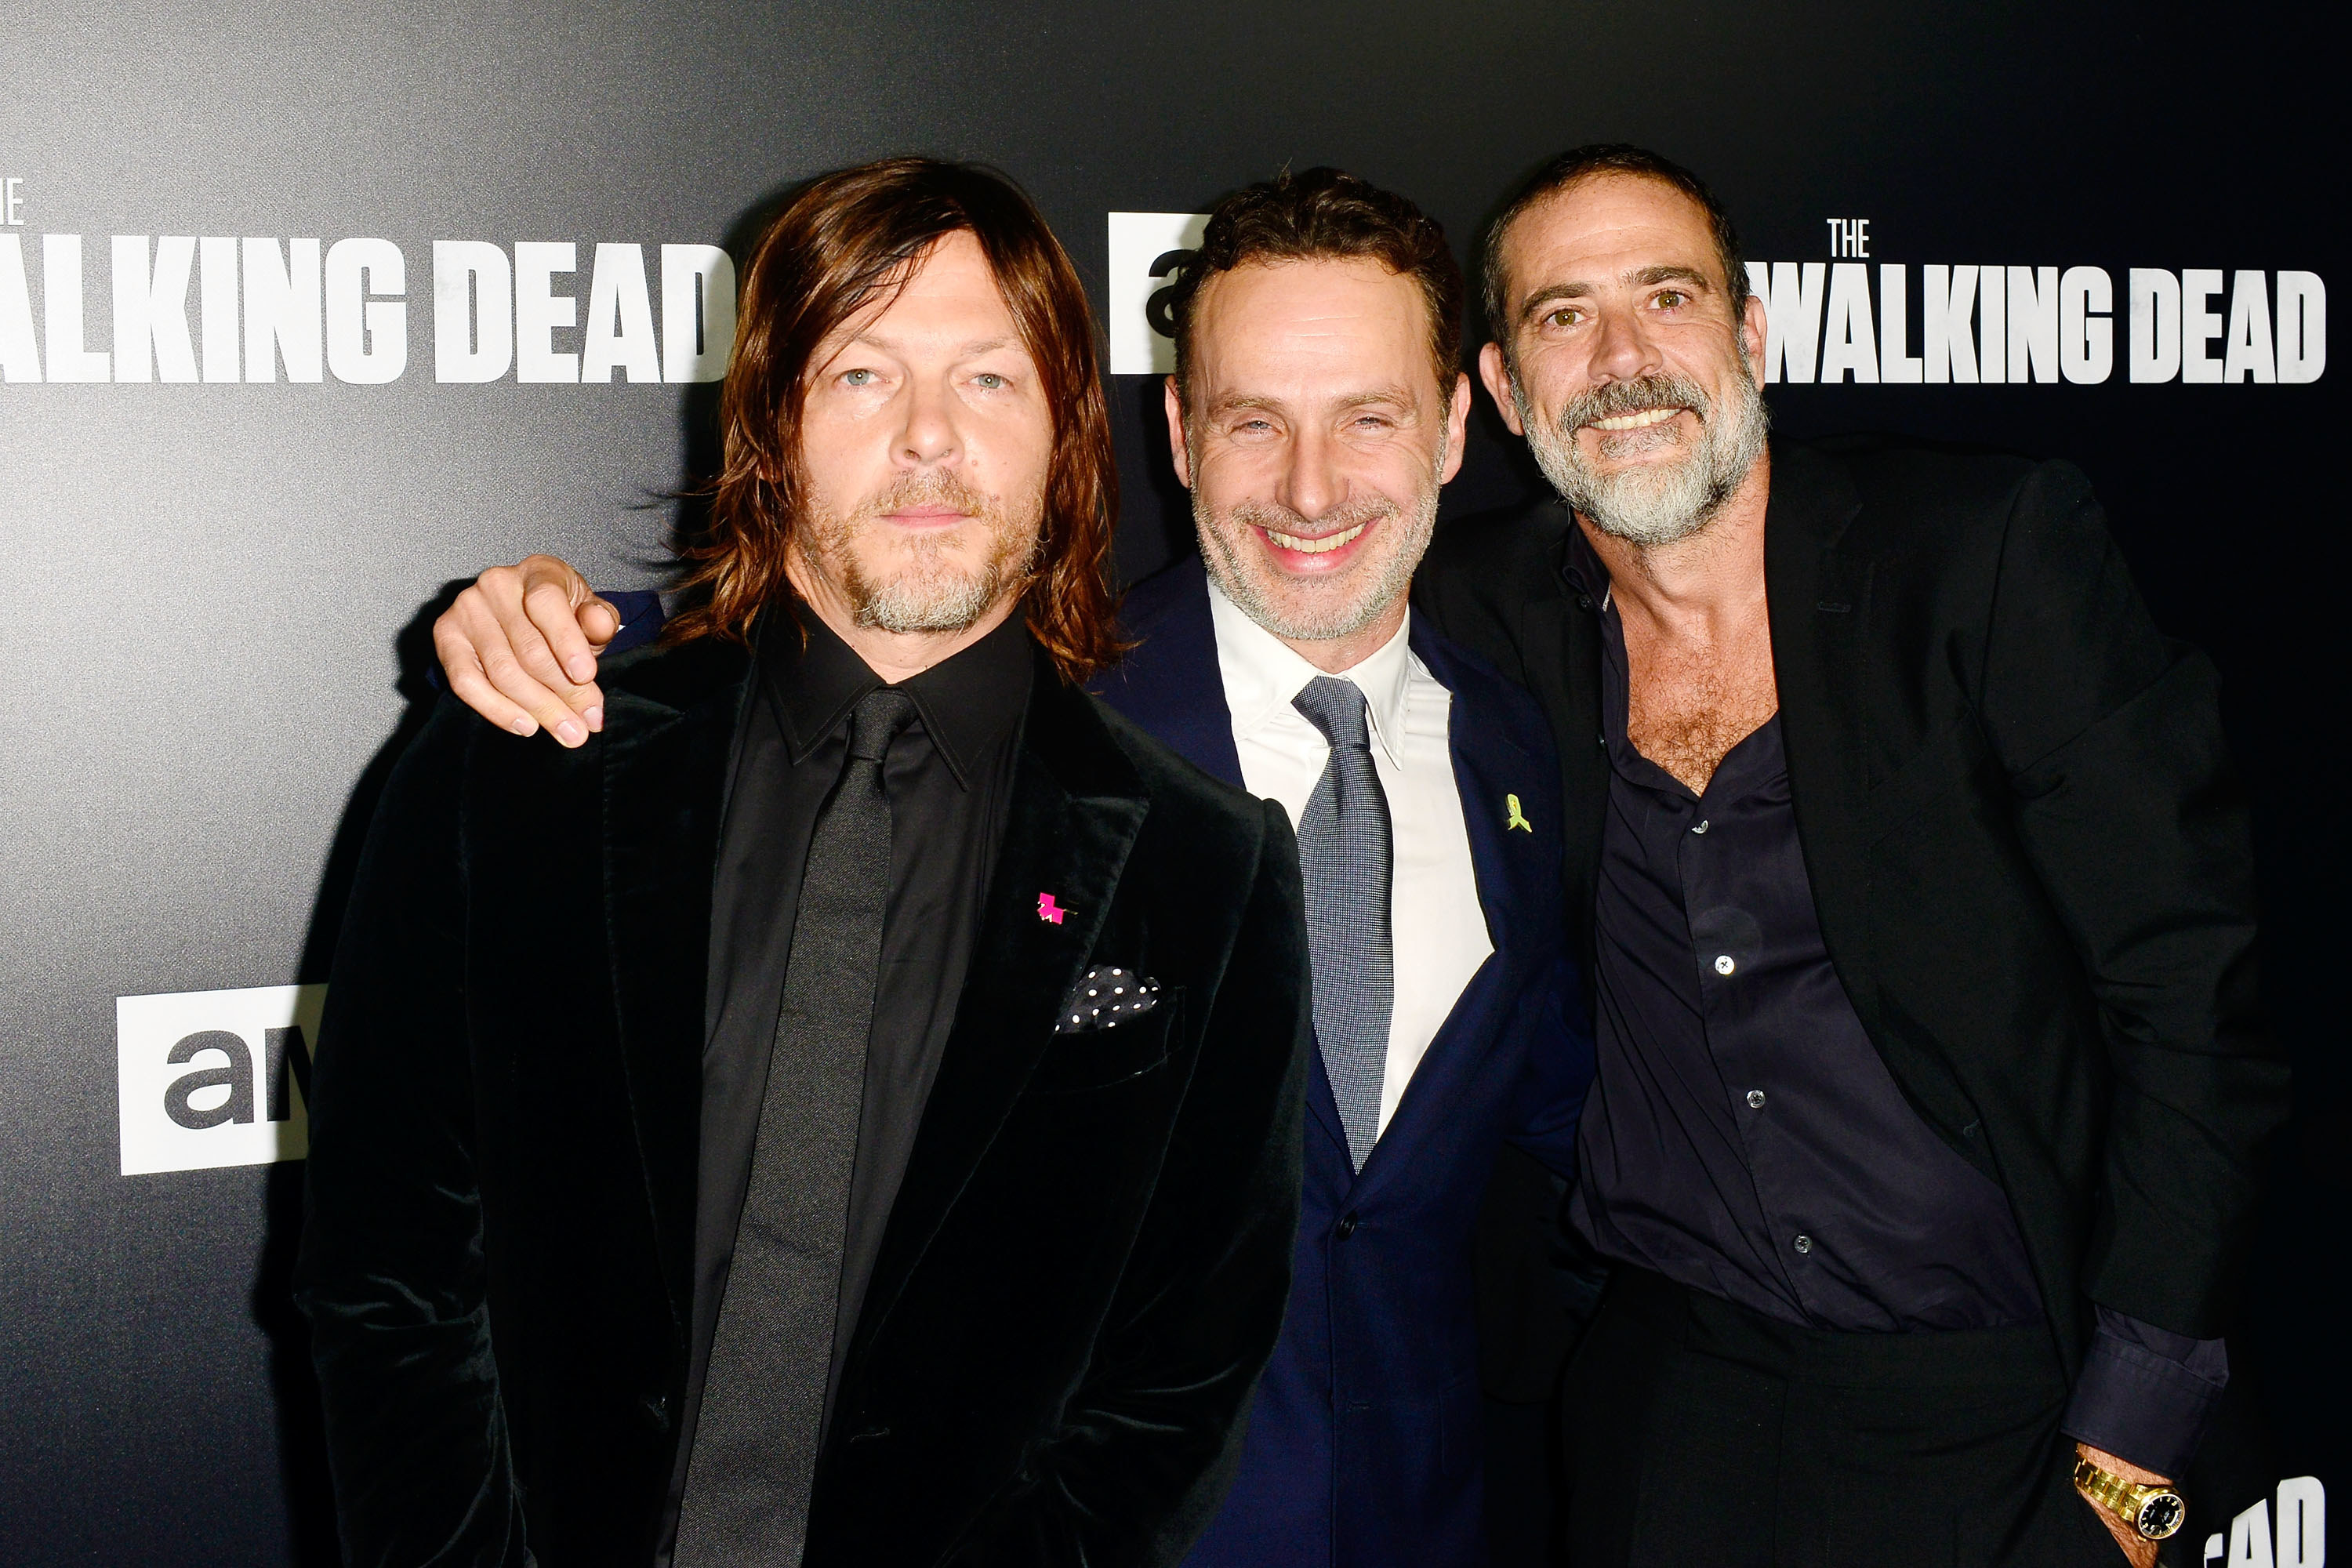 Members of the cast of The Walking Dead at a press event